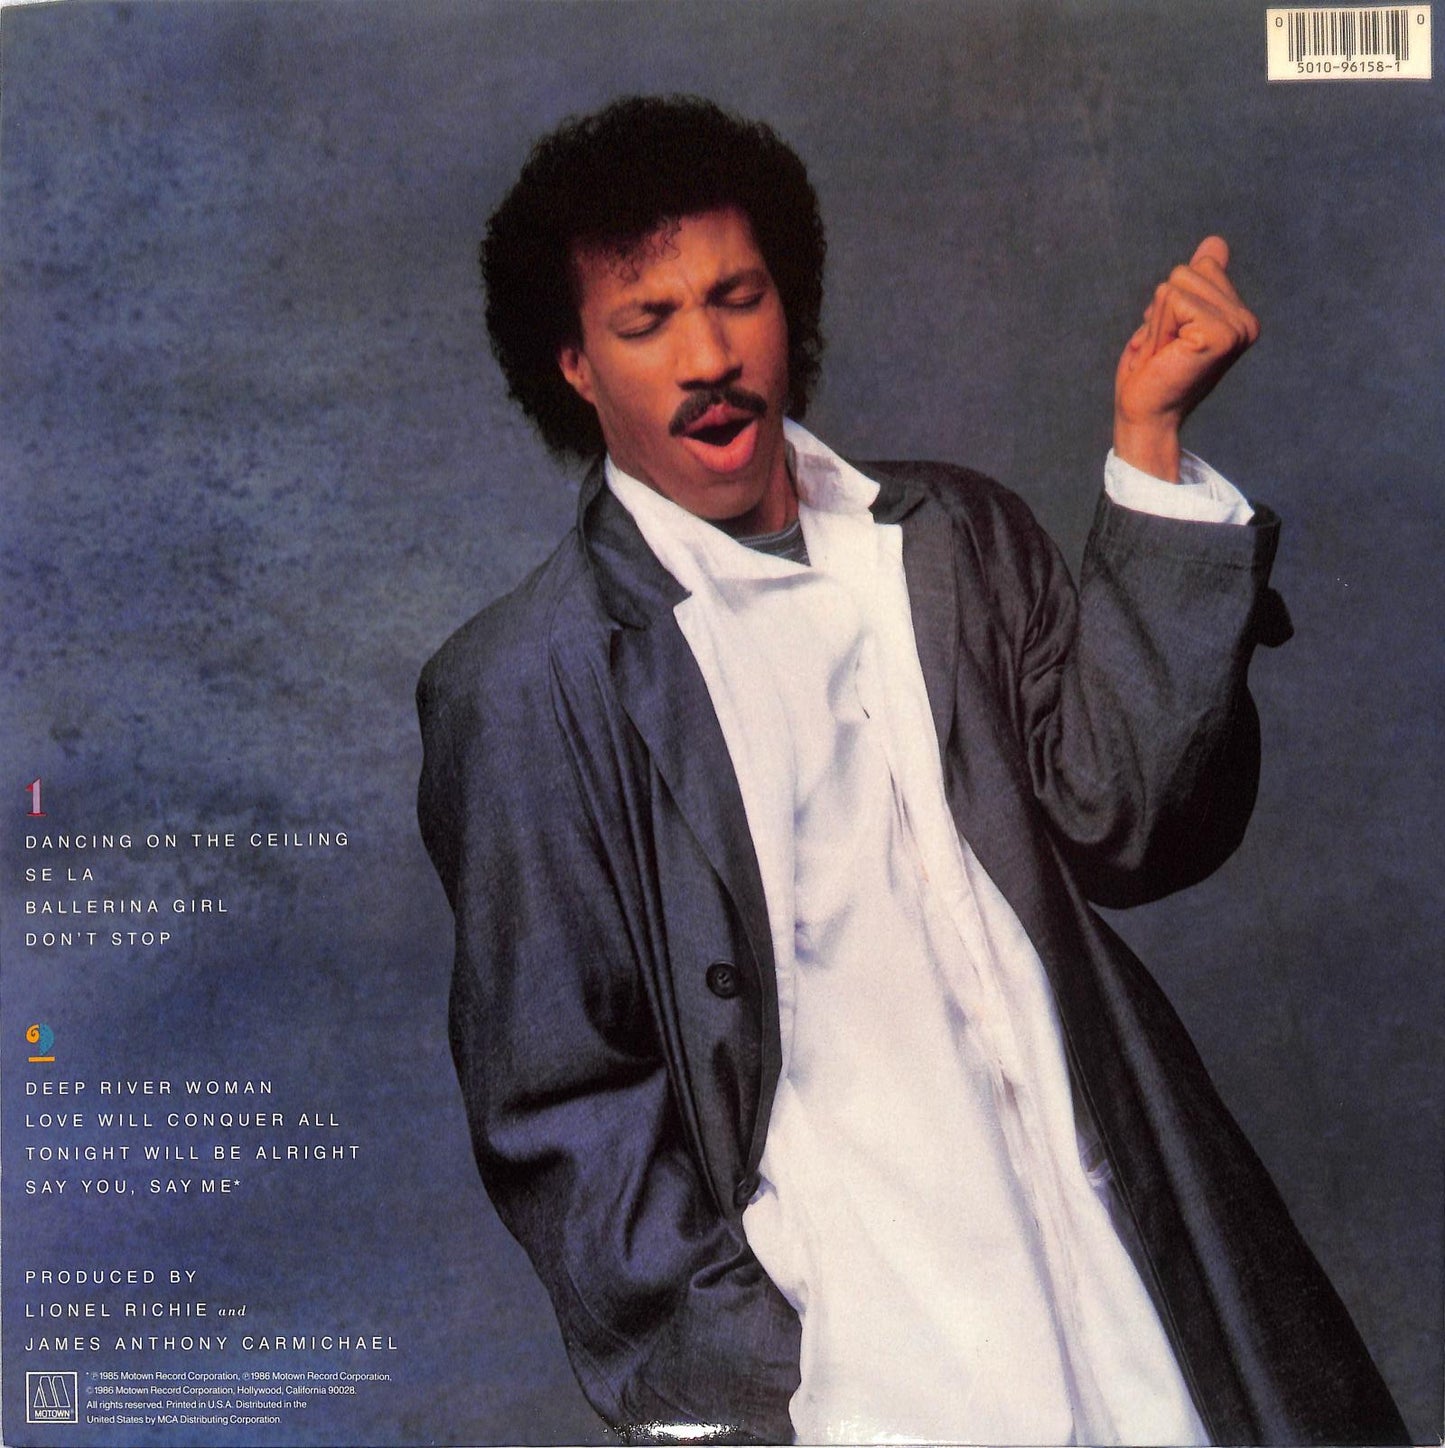 LIONEL RICHIE - Dancing On The Ceiling